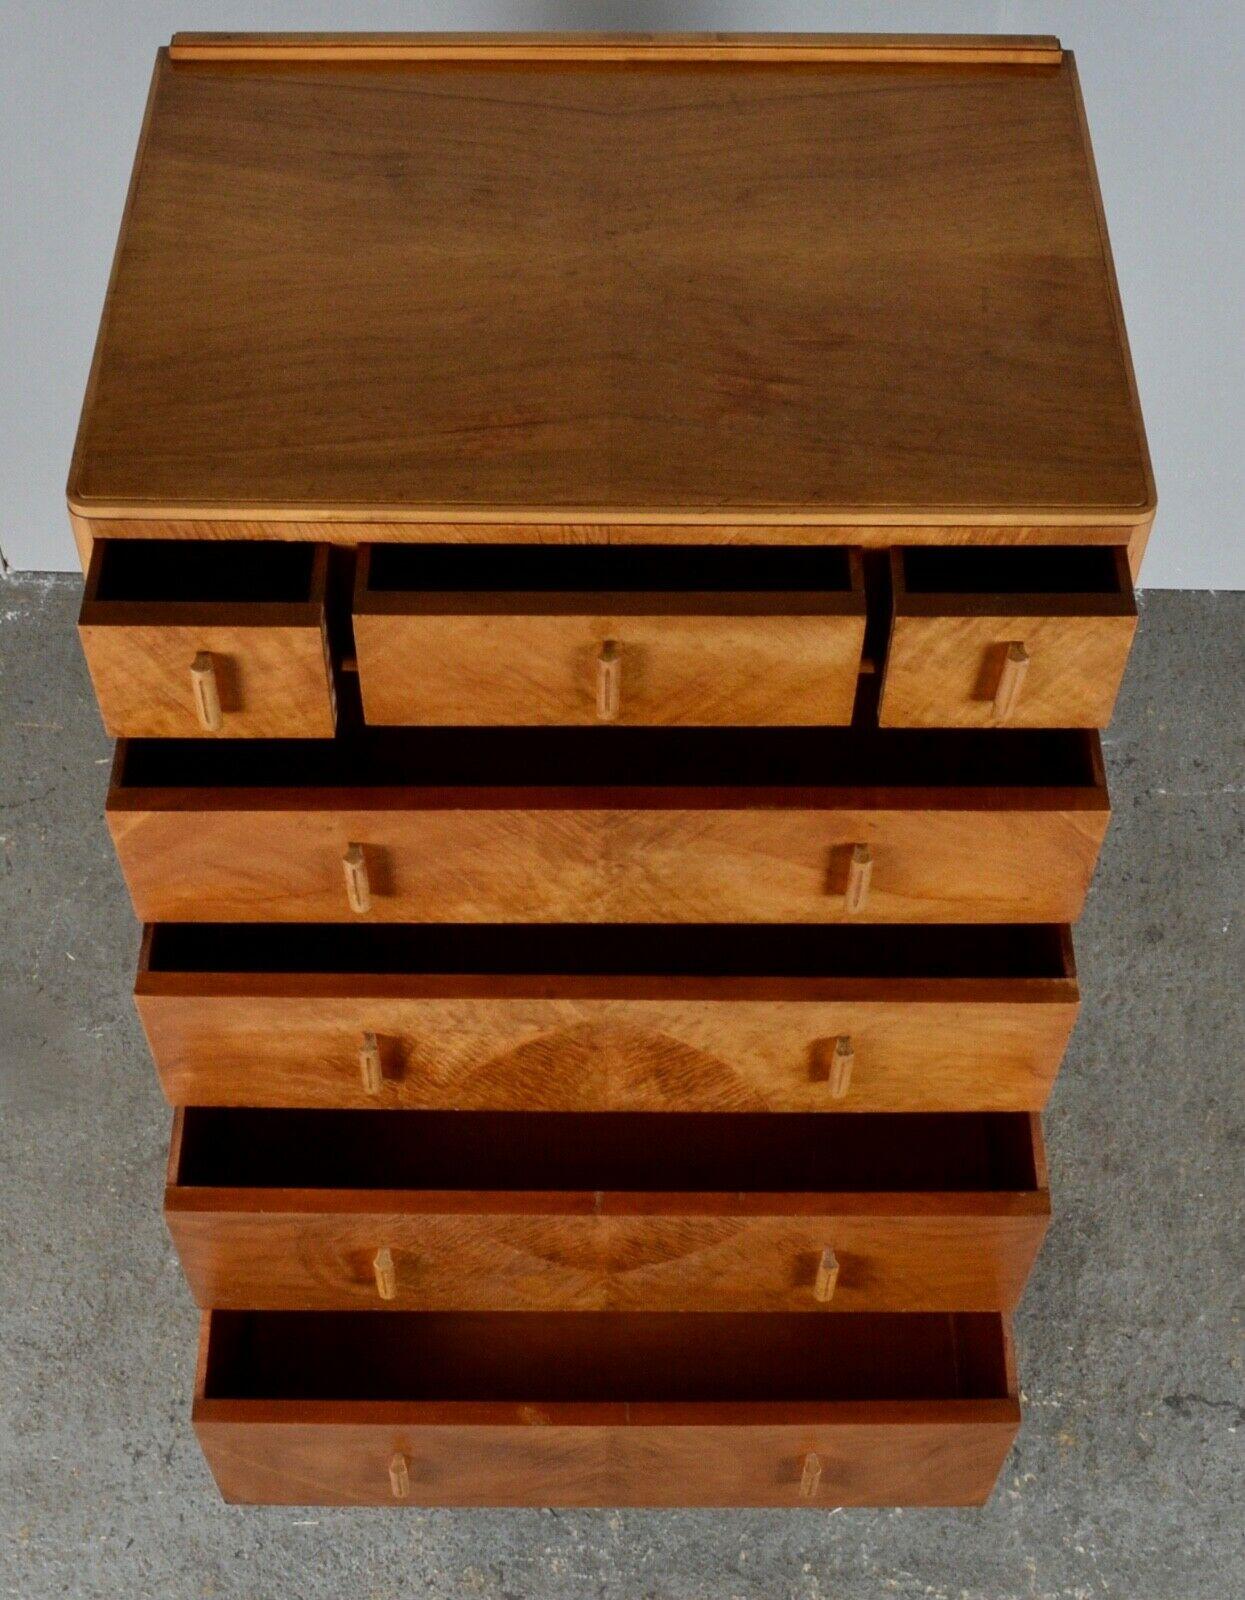 Maple ART DECO MAPLE CHEST OF DRAWER STAMPED ARMY & NAVY LTD 1950/WARDROBE AVAiLABLE